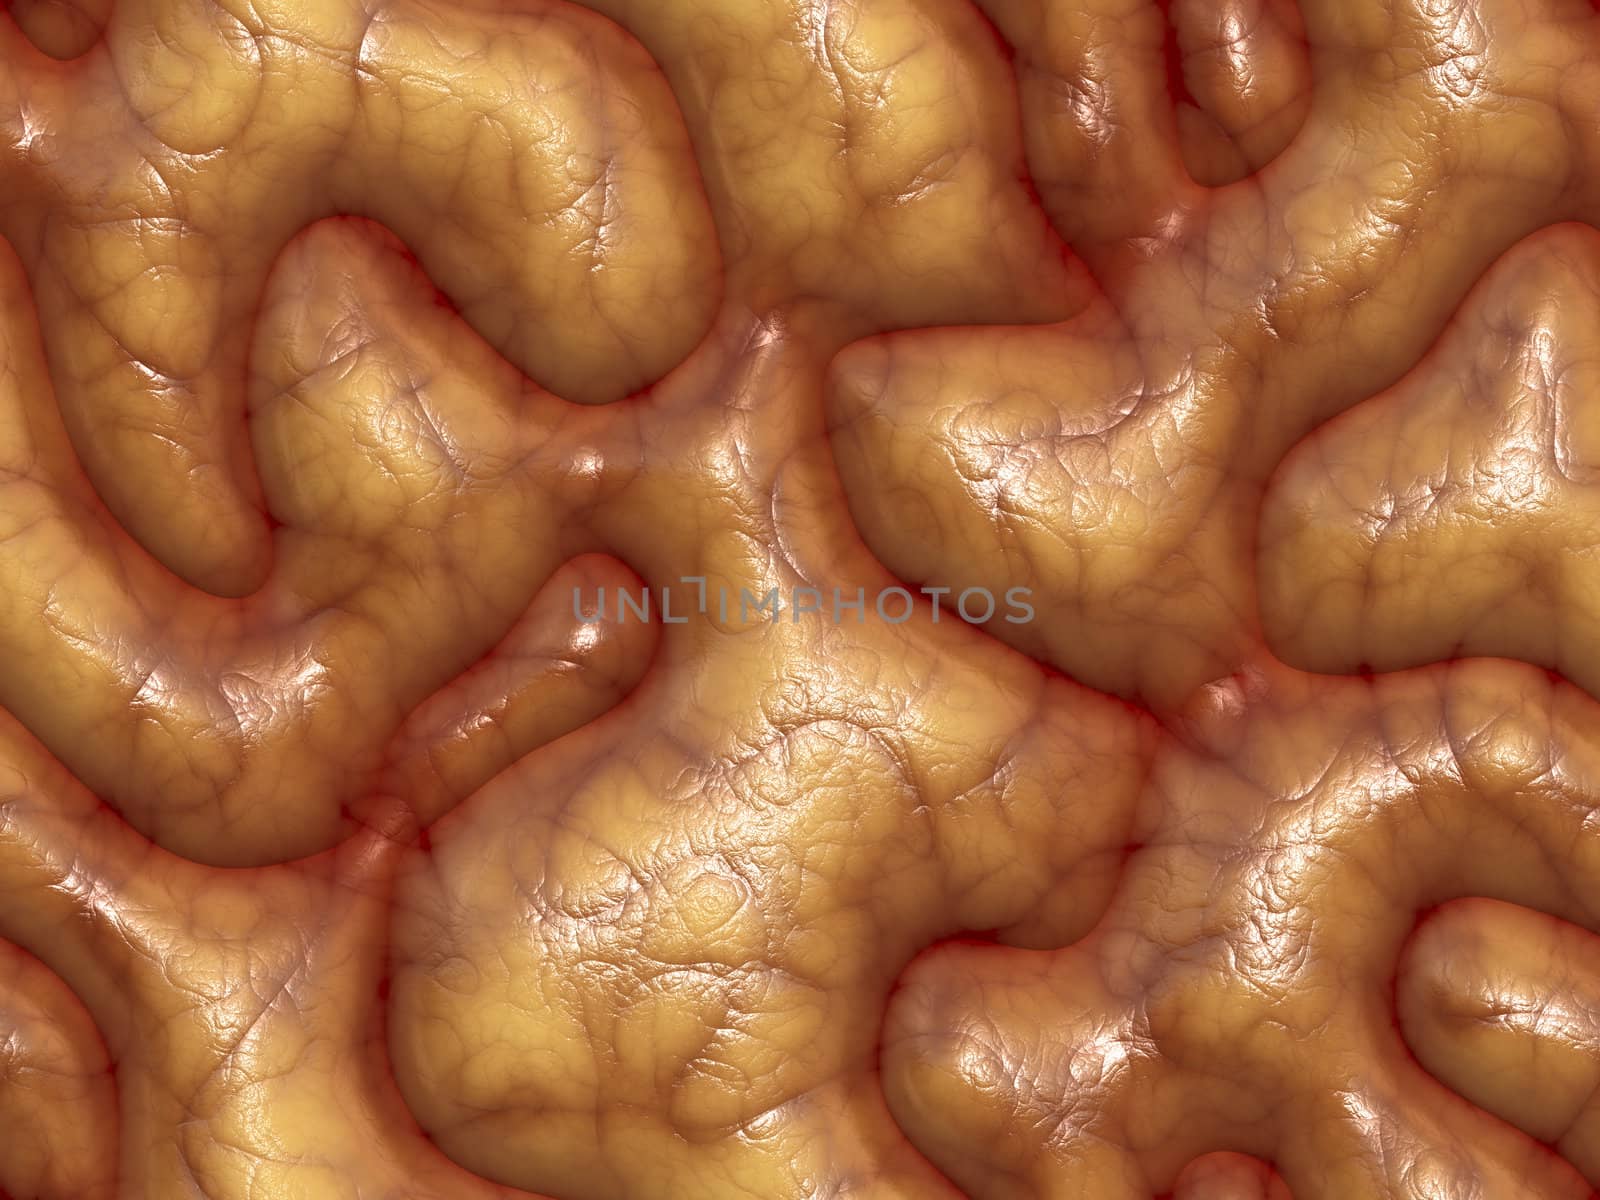 3d background texture of some brains - very realistic, and kind of nasty if this sort of thing grosses you out.